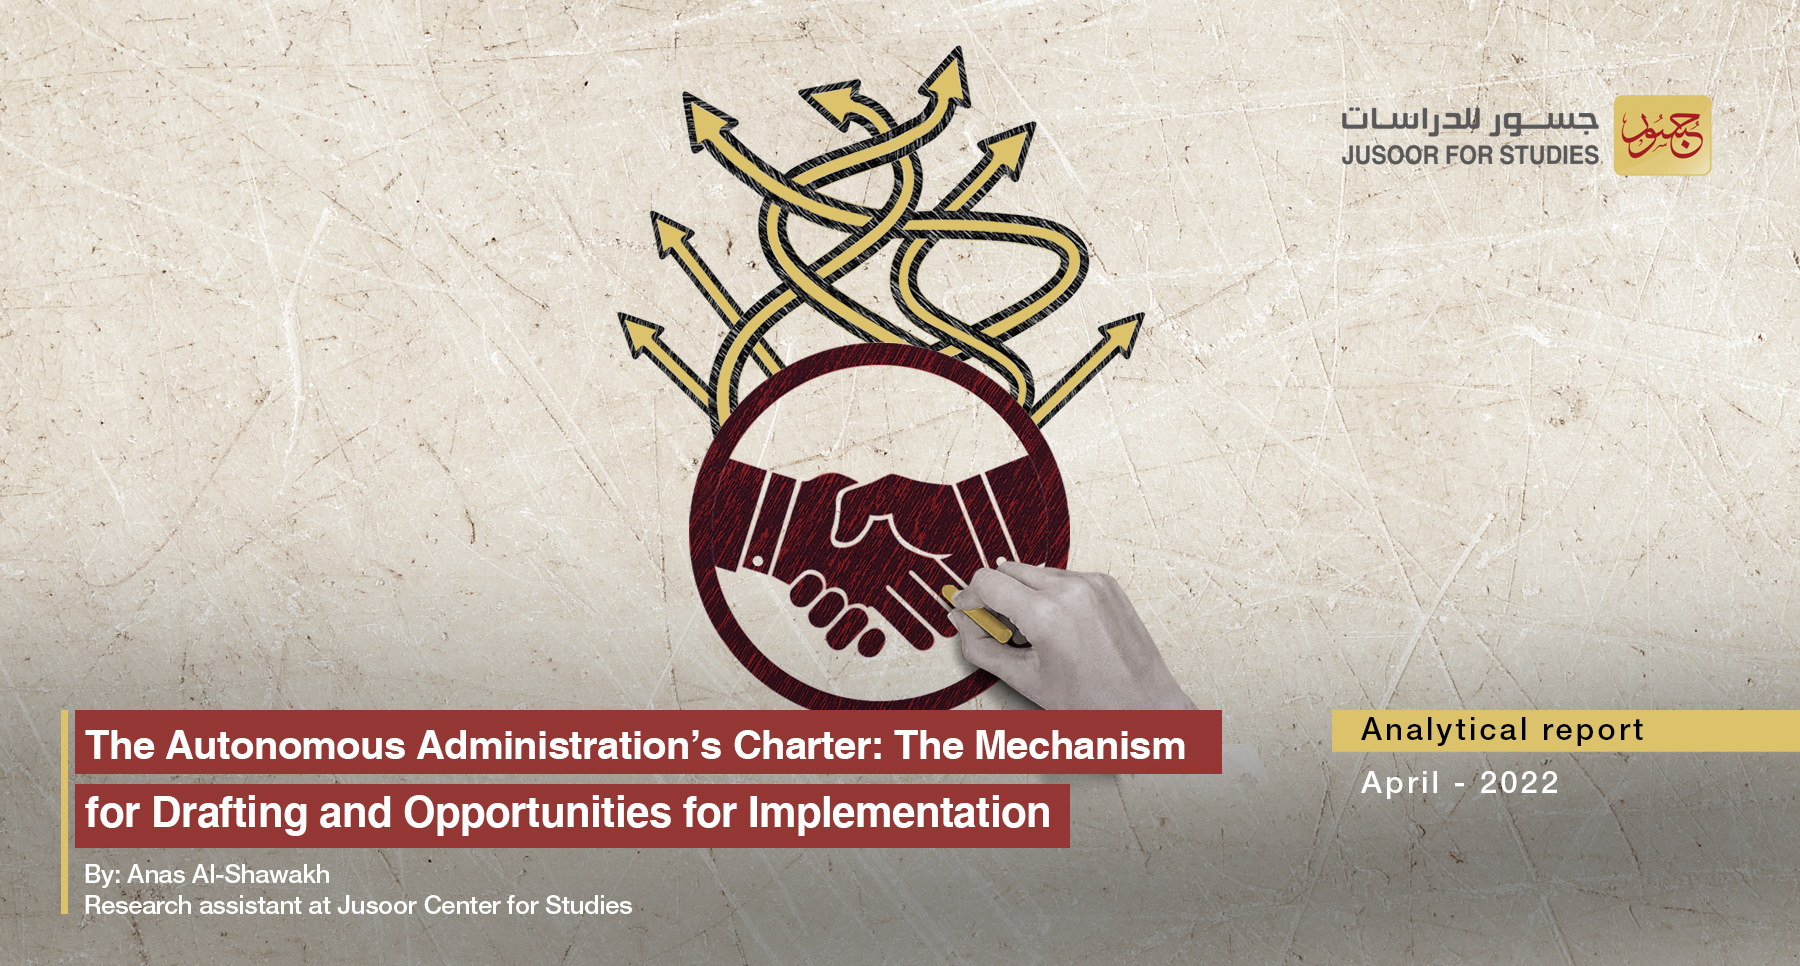 The Autonomous Administration’s Charter: The Mechanism for Drafting and Opportunities for Implementation